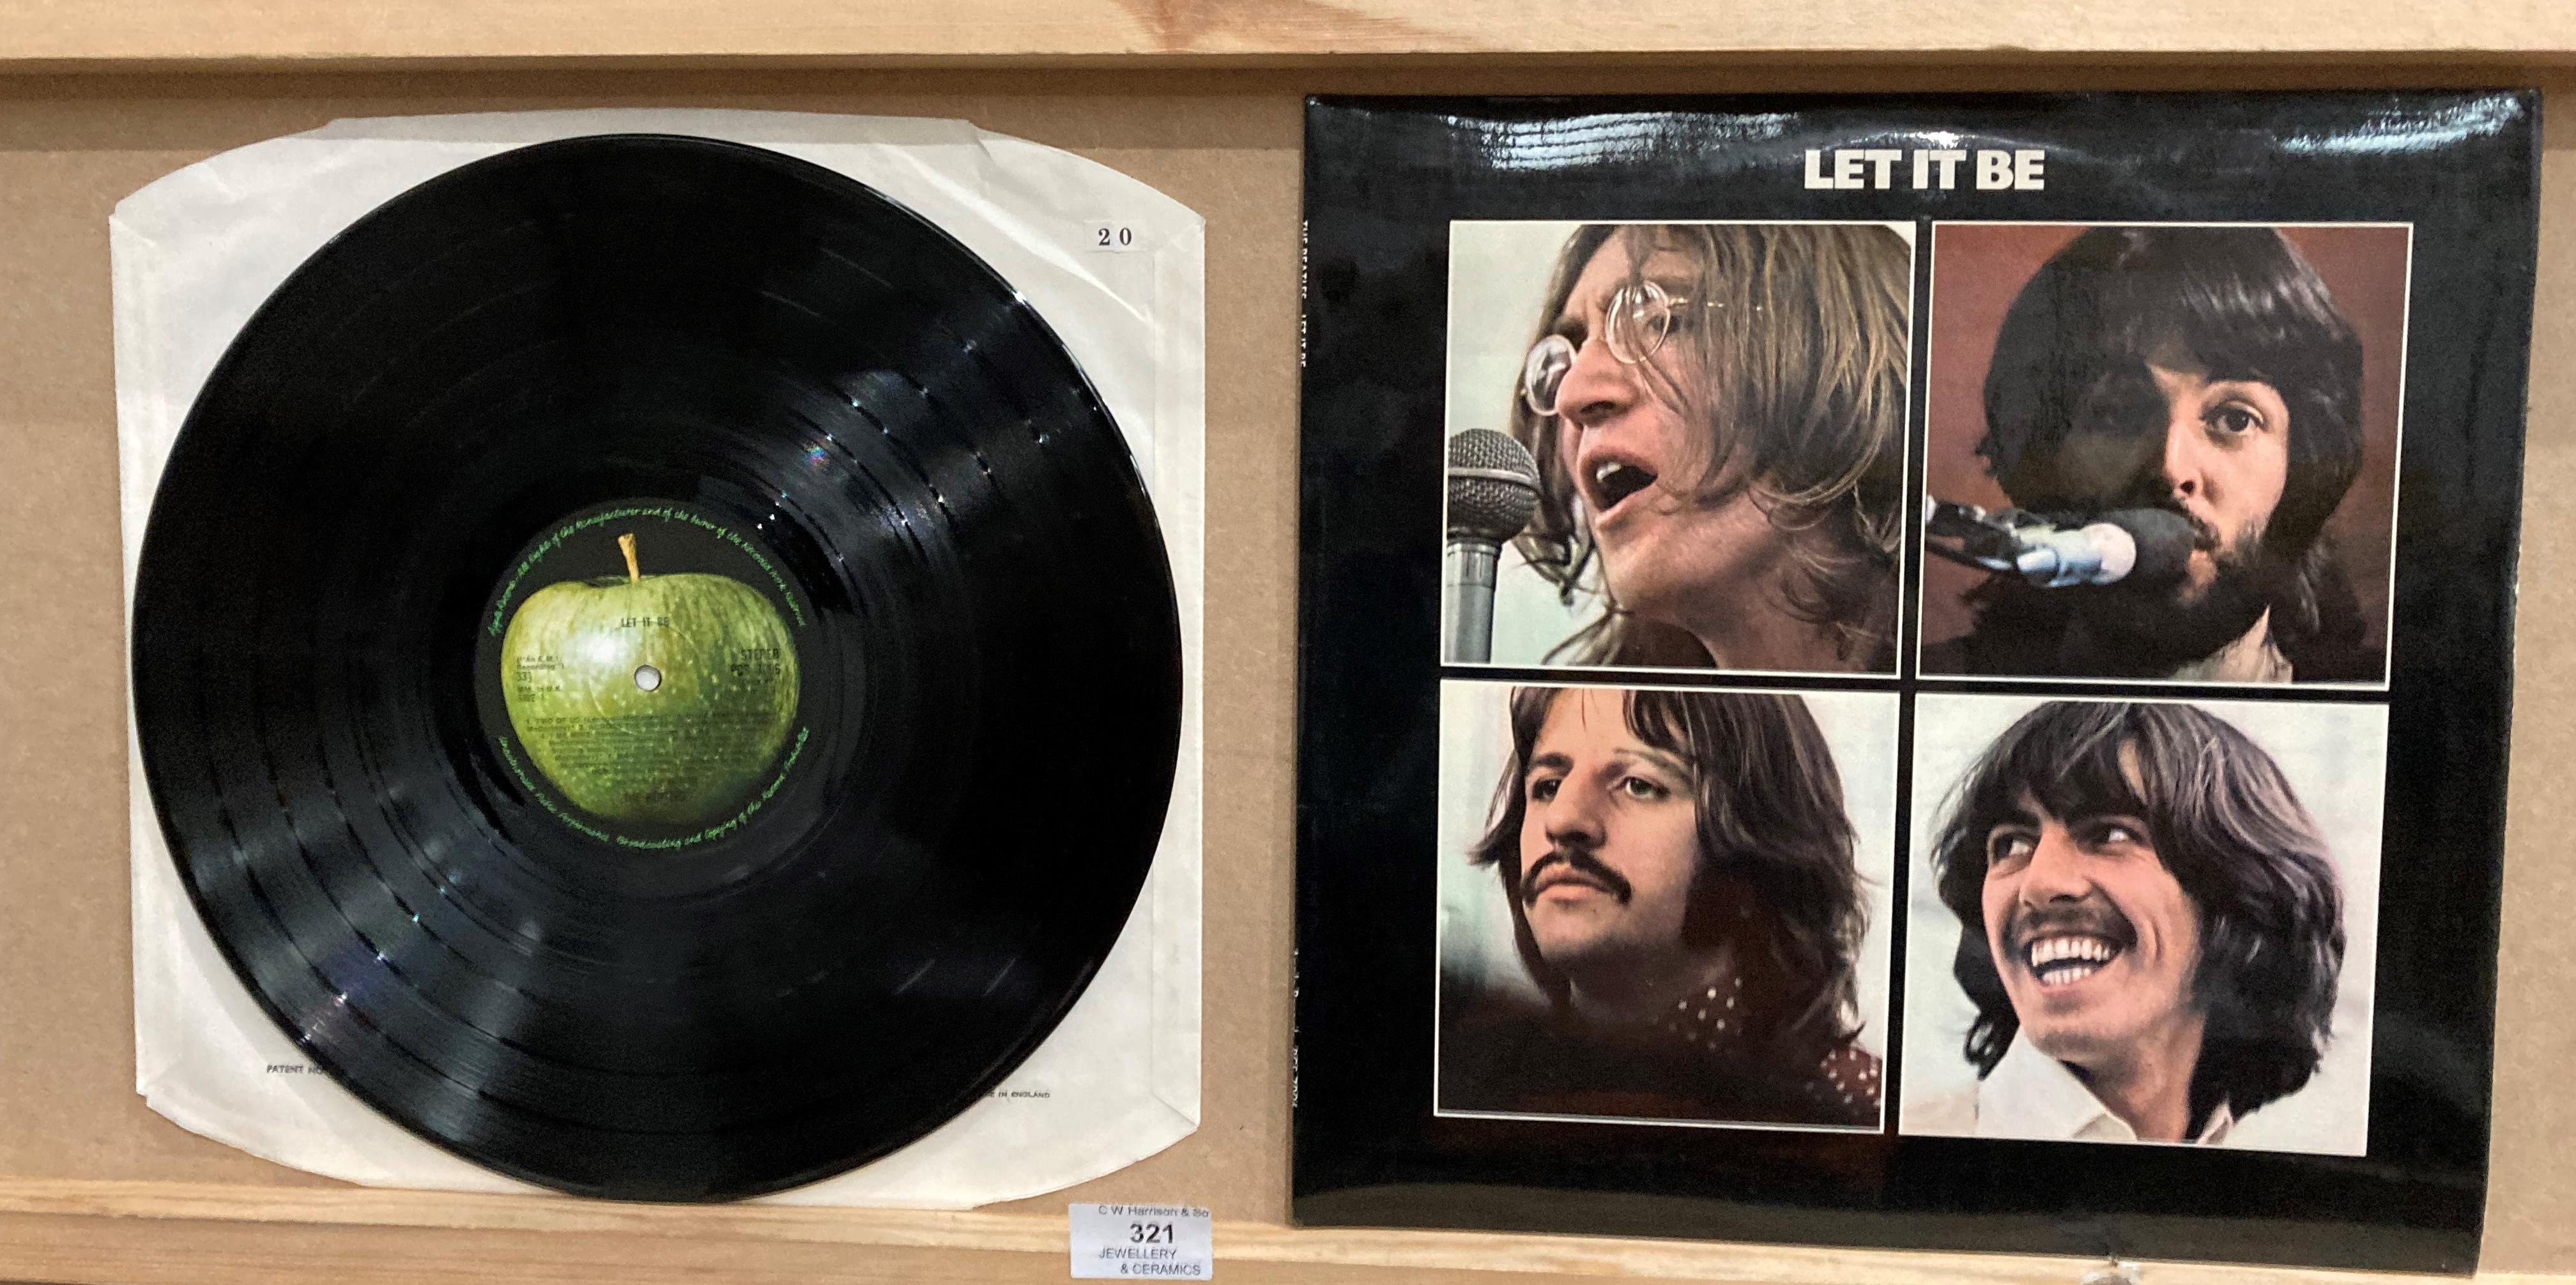 The Beatles LP 'Let It Be' on Apple EMI Records no.